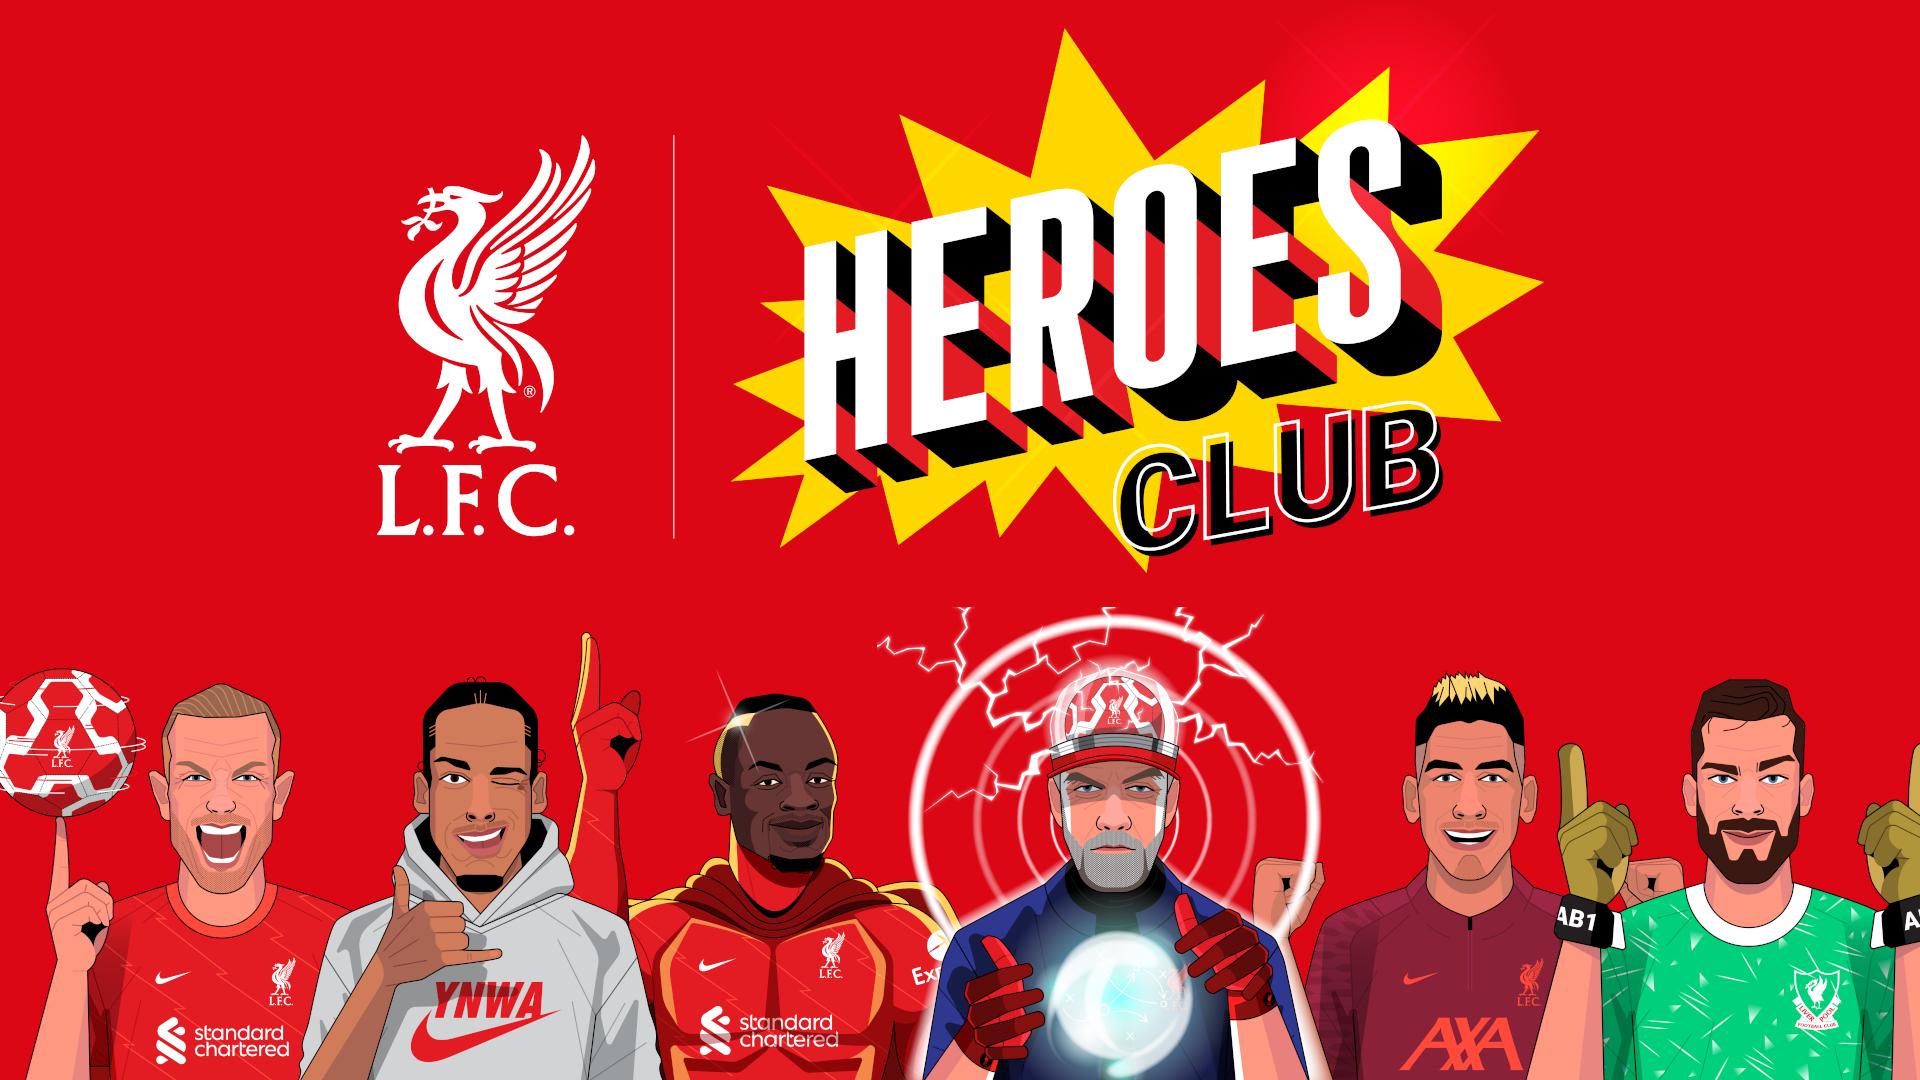 Liverpool — Reds LFC Heroes Club, a in digital collectibles